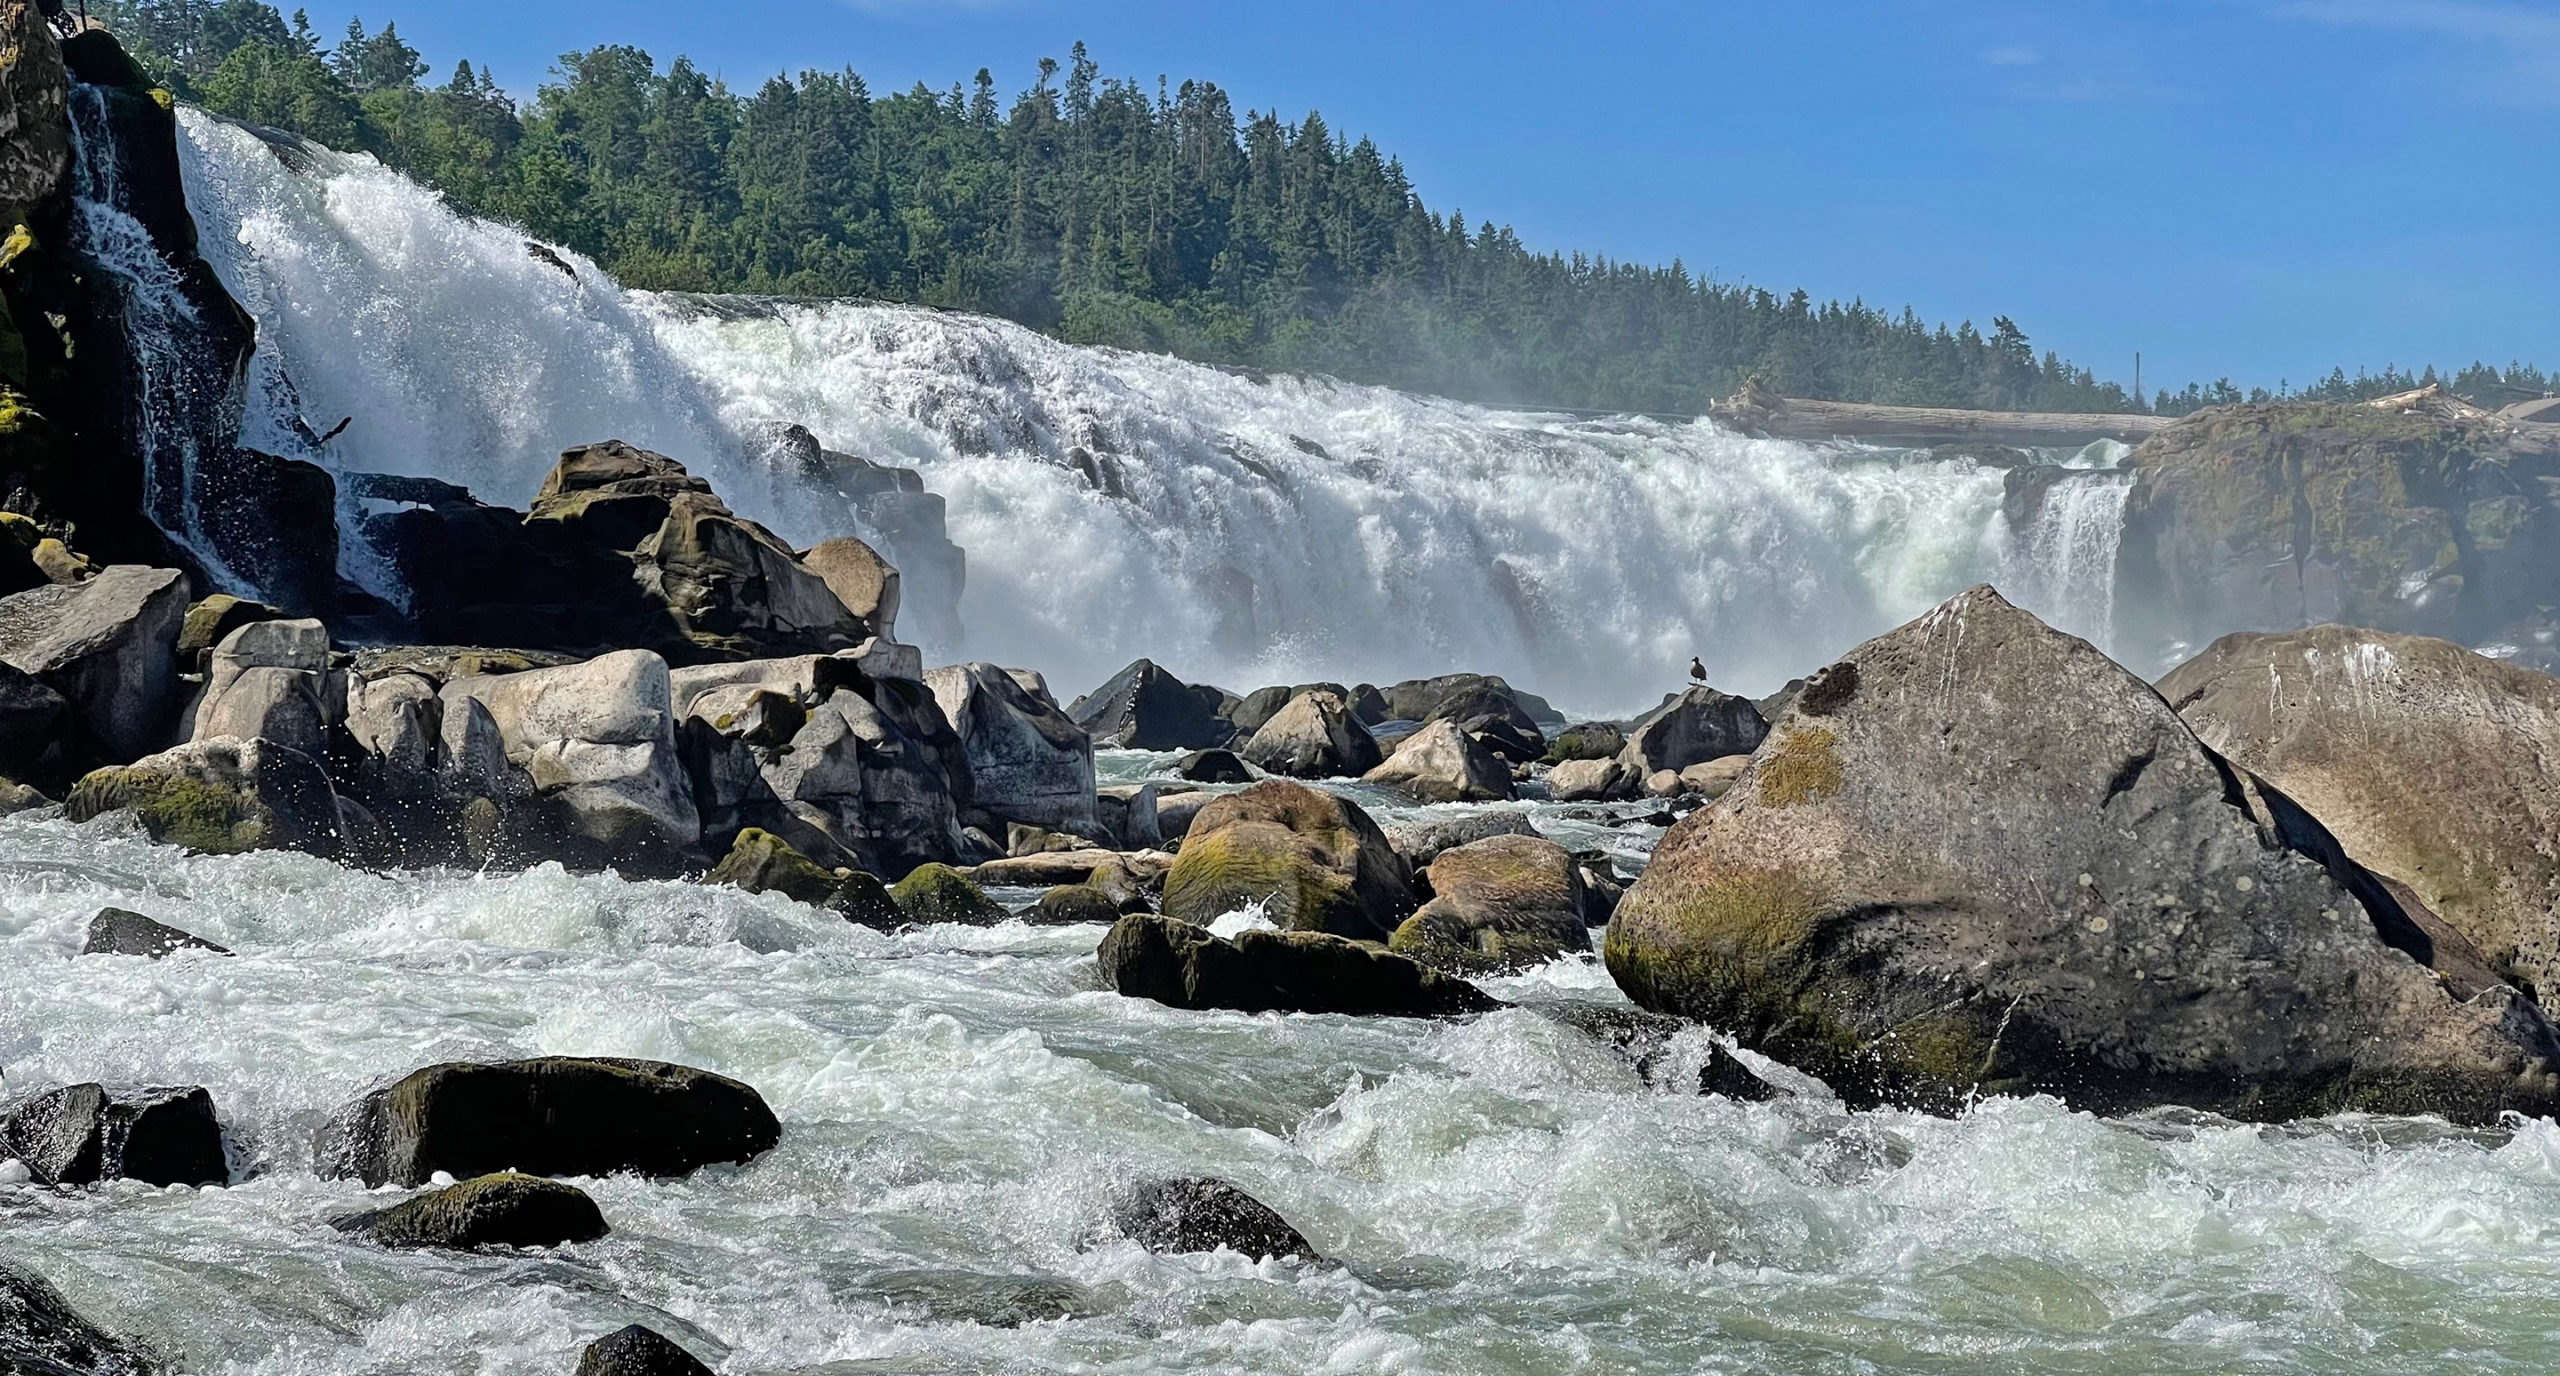 Closeup of Willamette Falls seen from the river, with the rapids in the foreground.